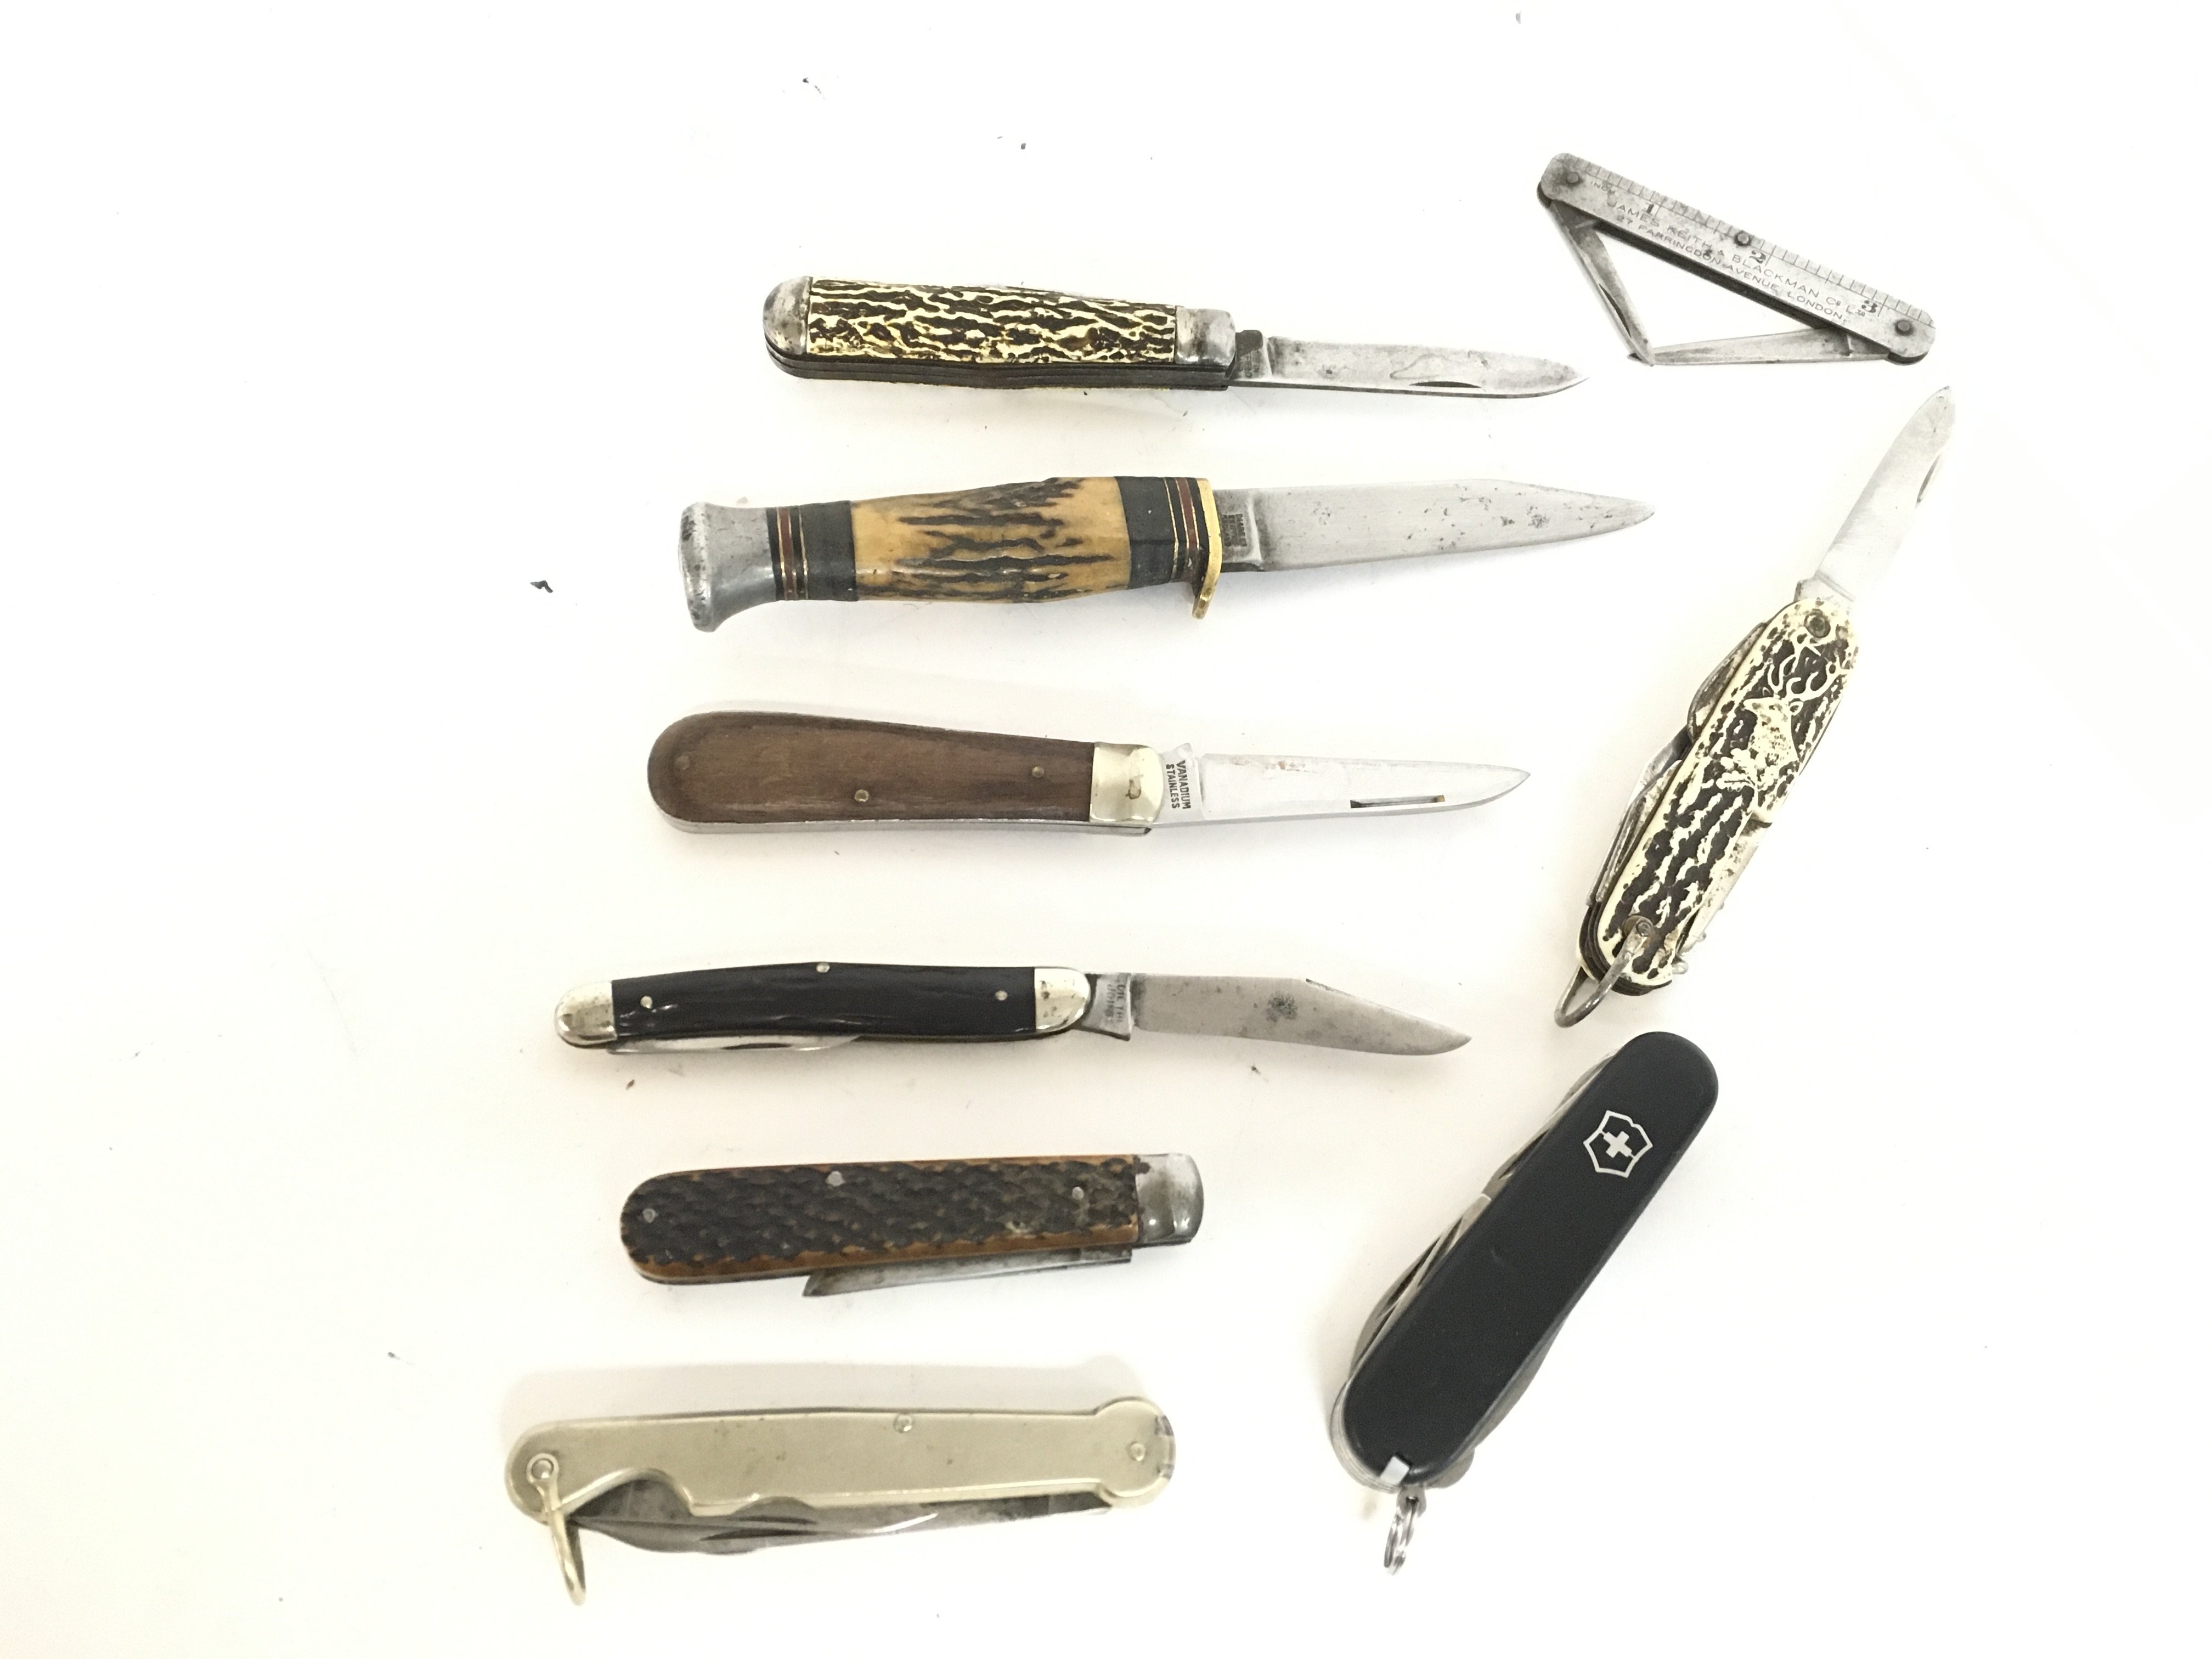 A collection of vintage pocket knives including a